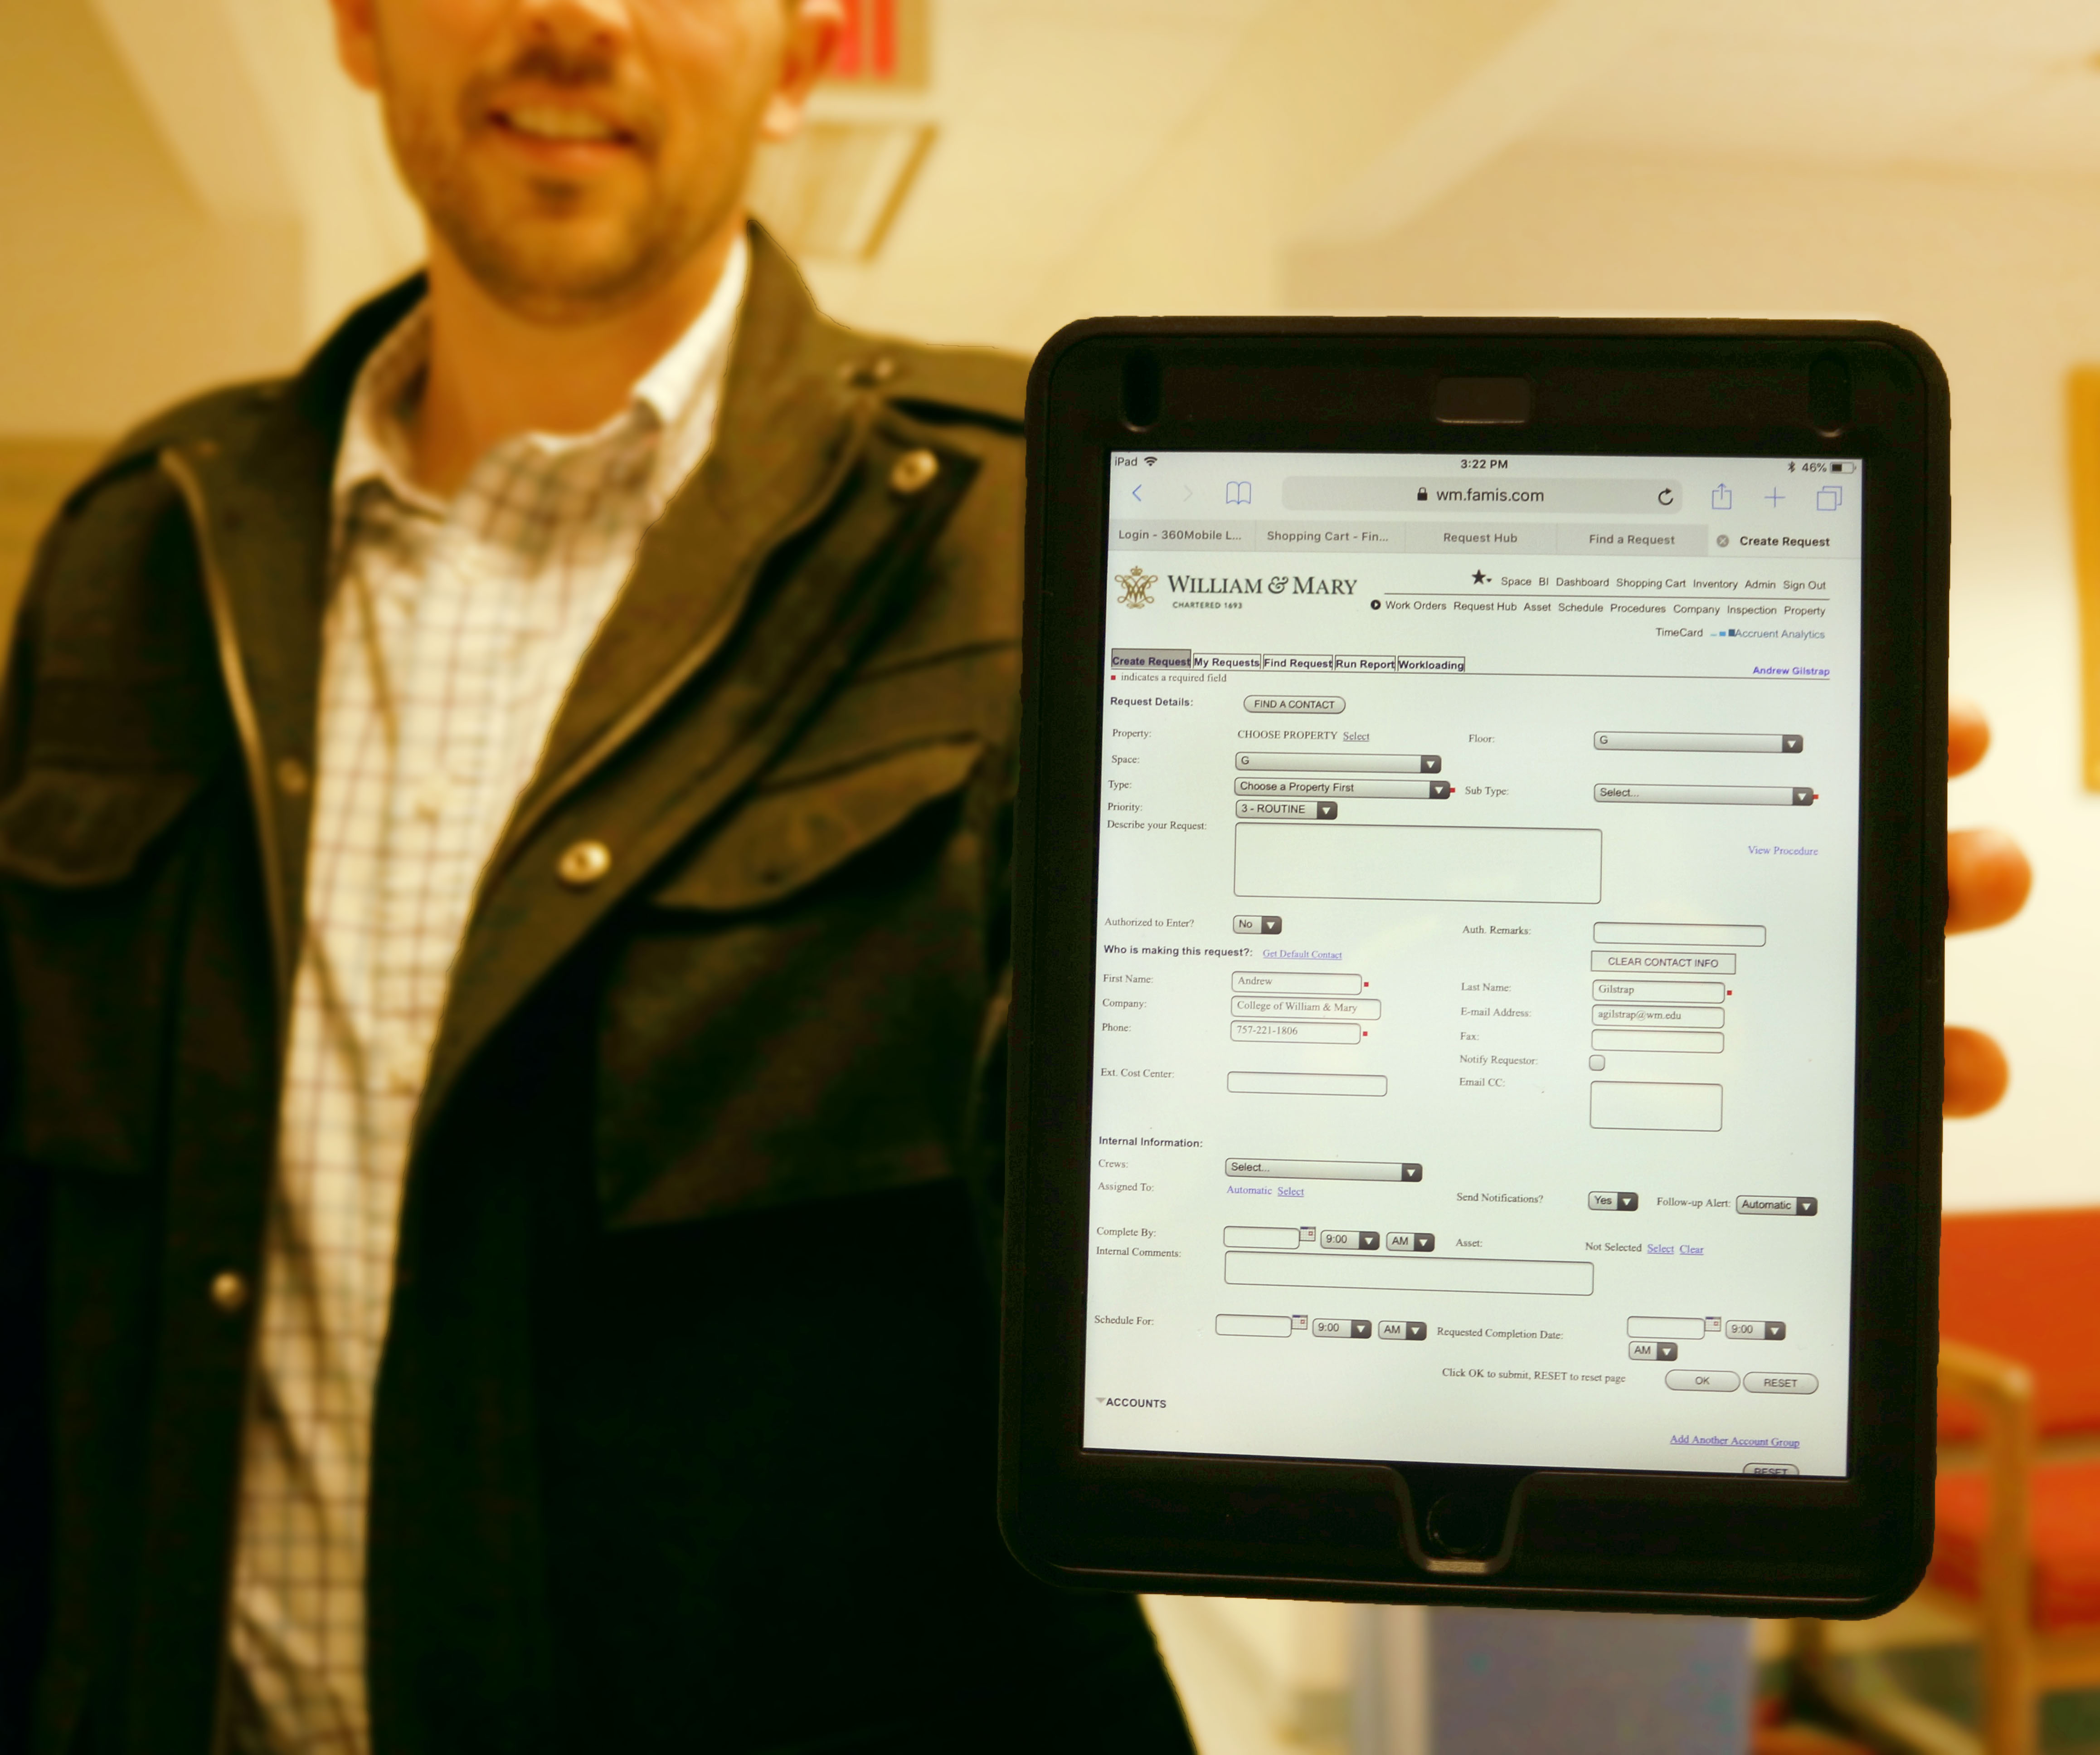 Once Jamf was installed onto the iPads, Facilities Management was ready to start filing work orders remotely. Pictured is Facilities Management's Associate Director for Building Services Andrew Gilstrap showing the home screen for work order processing.